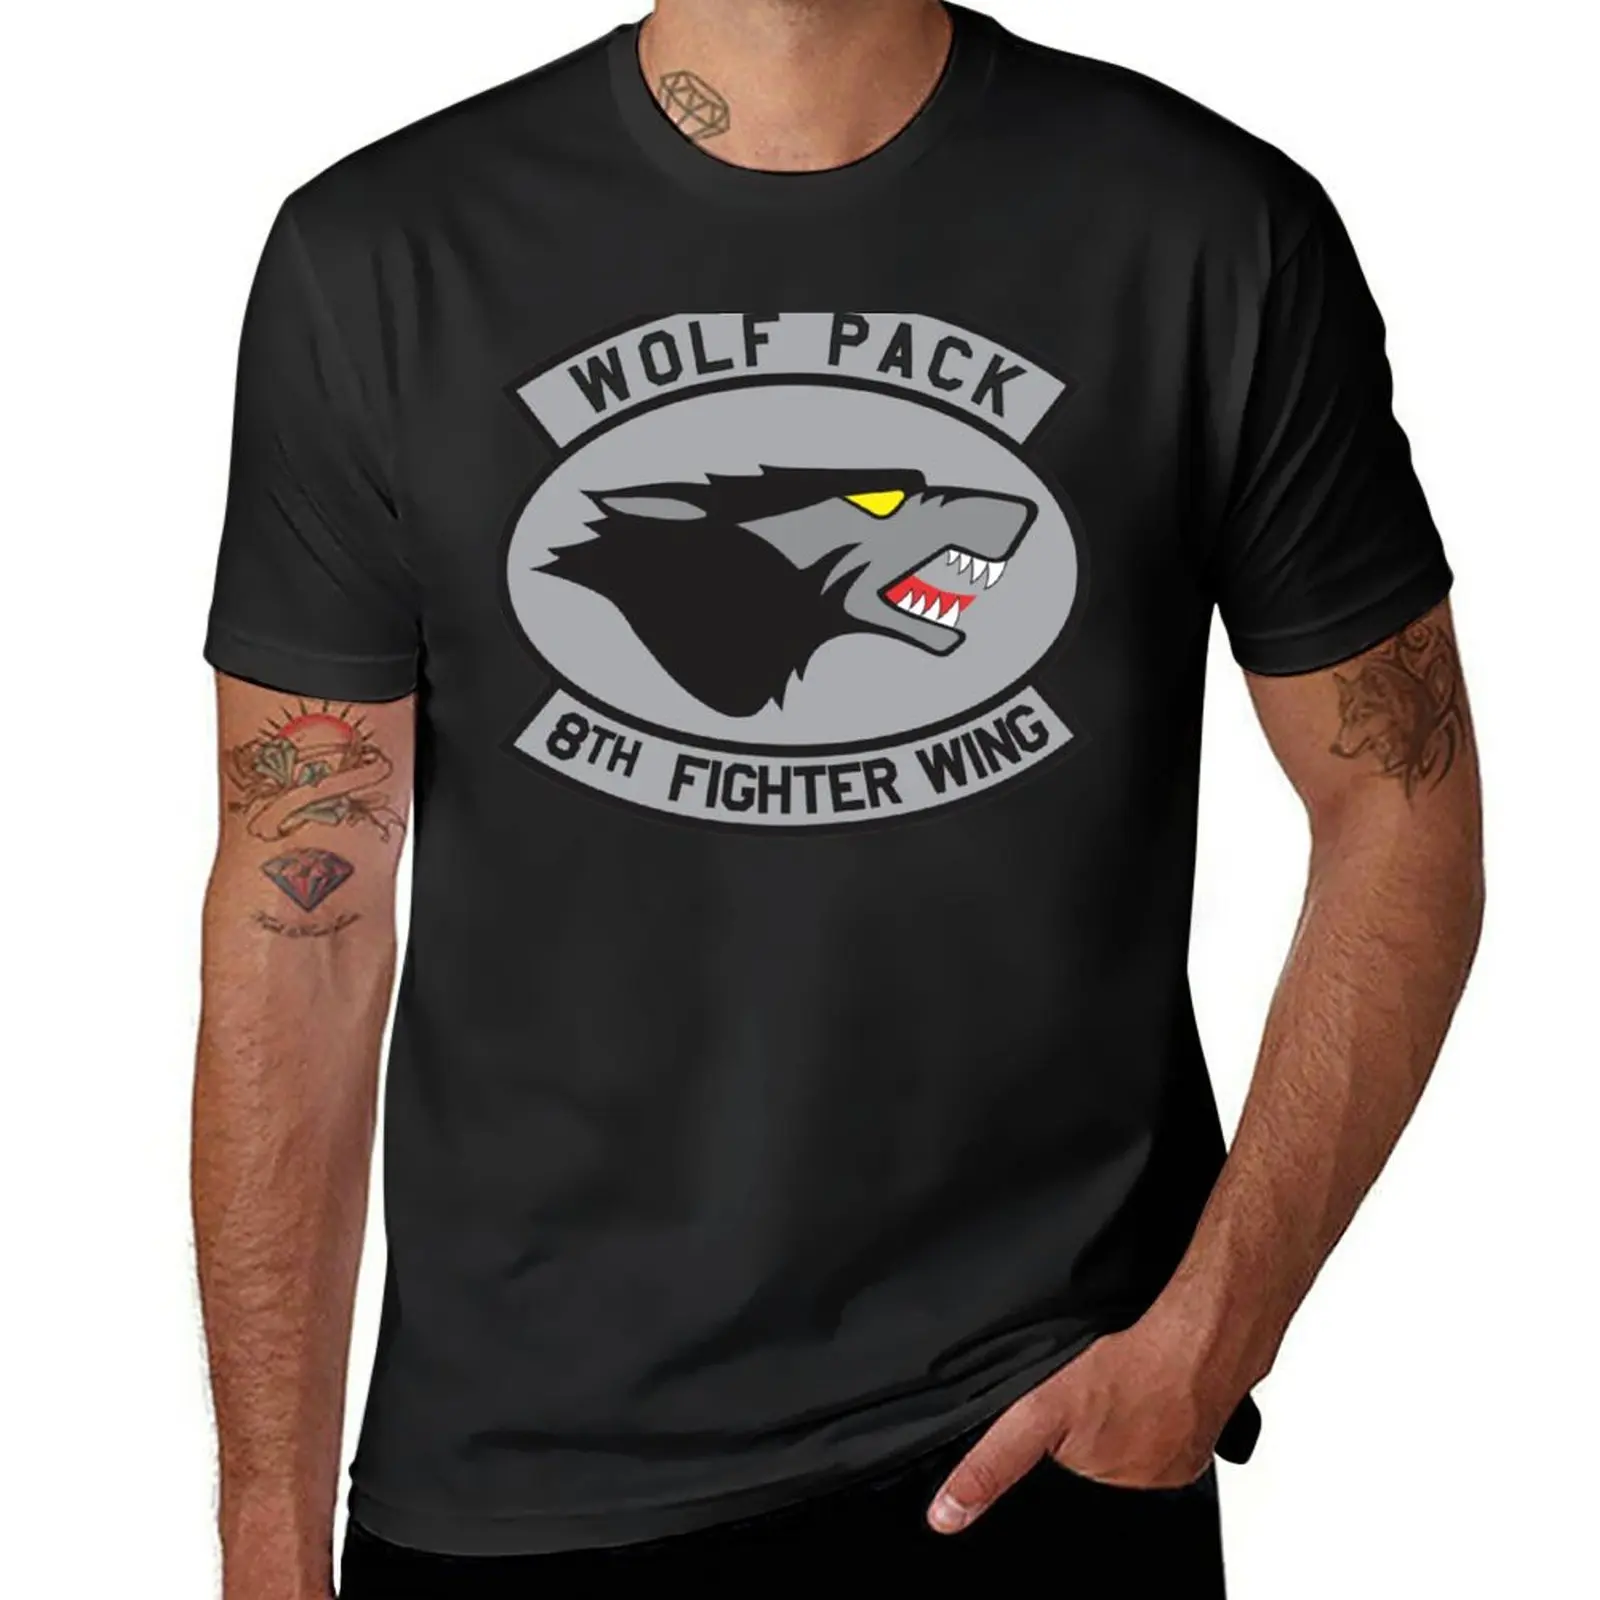 

New Wolf Pack - Kunsan Air Base - Republic of Korea - Clean Style T-Shirt tops cute clothes mens graphic t-shirts funny